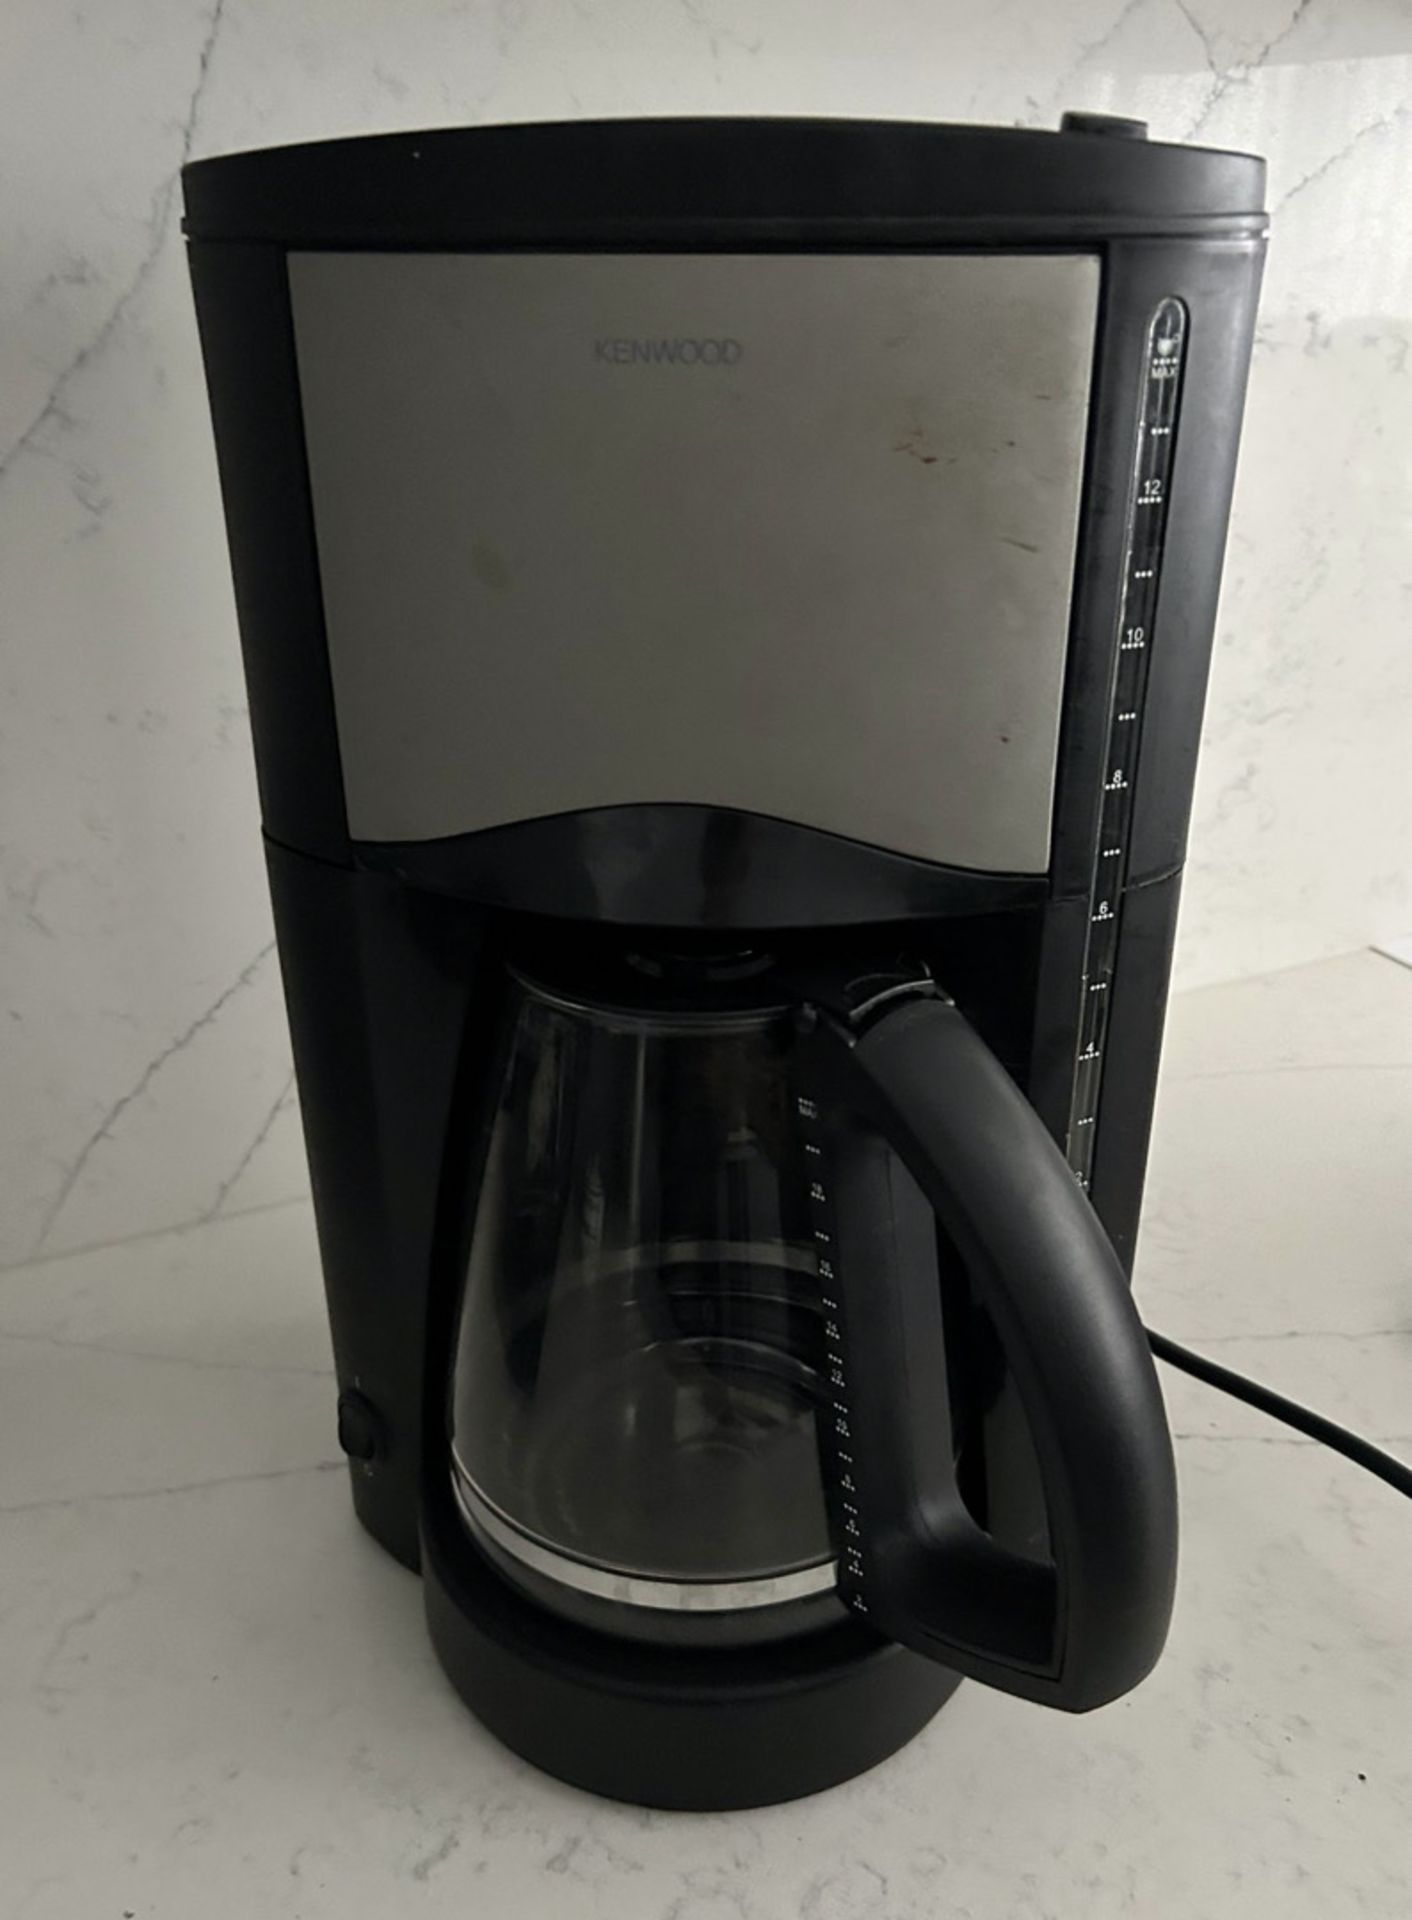 Kenwood CM651 Filter Coffee Maker, 900W (Black/Silver) - Tested and Working - NO VAT !